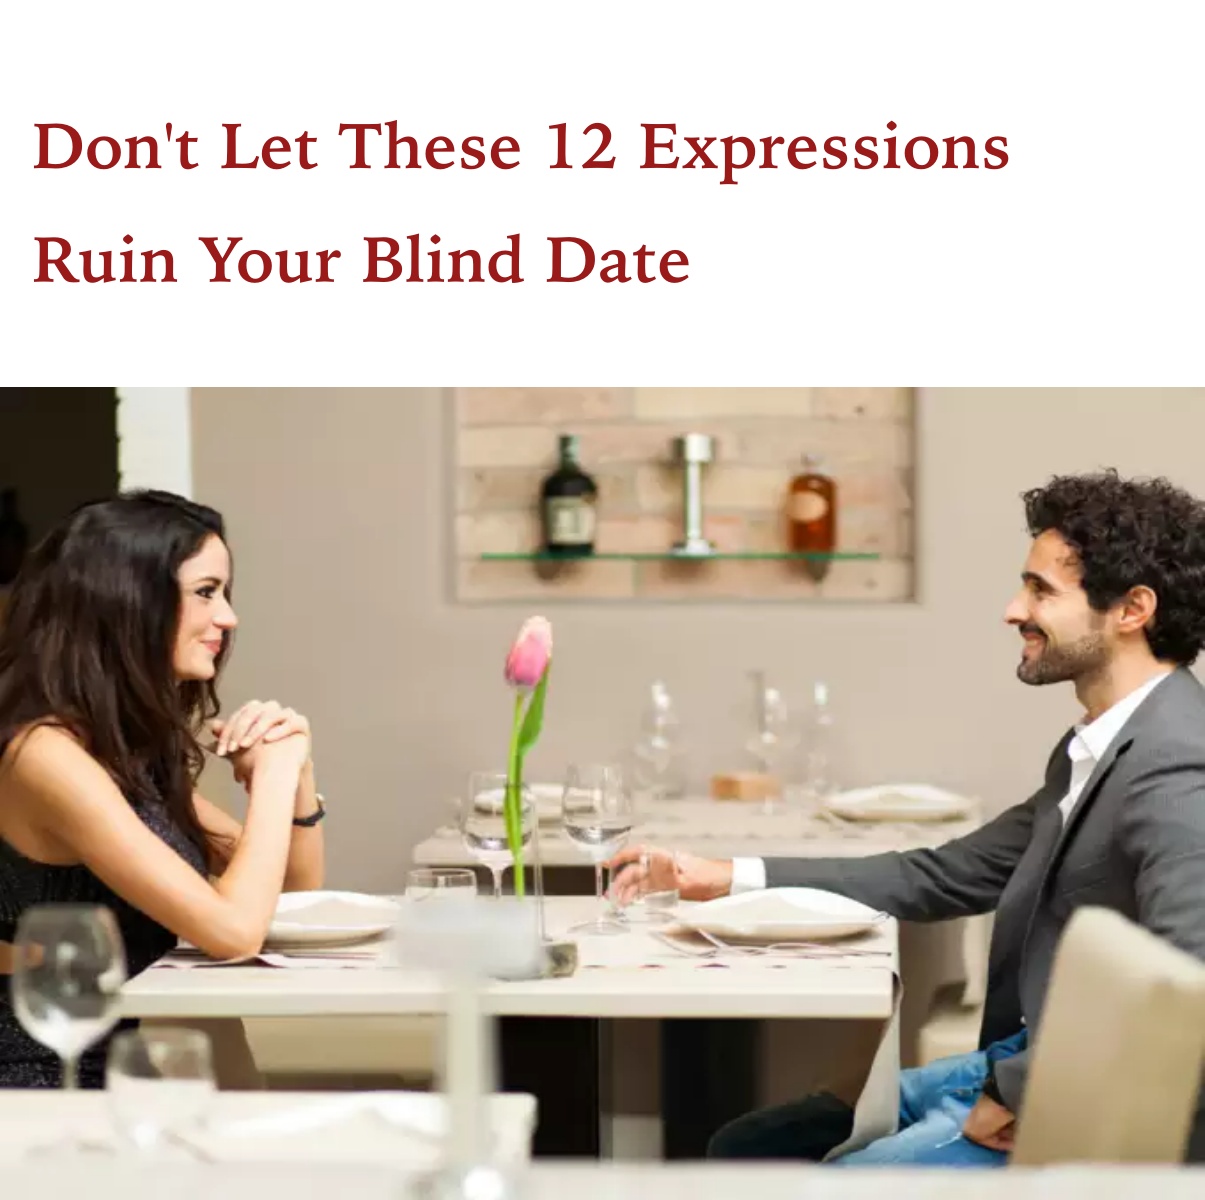 Don’t Let These 12 Expressions Ruin Your Blind Date: How to Win Over Your Blind Date?